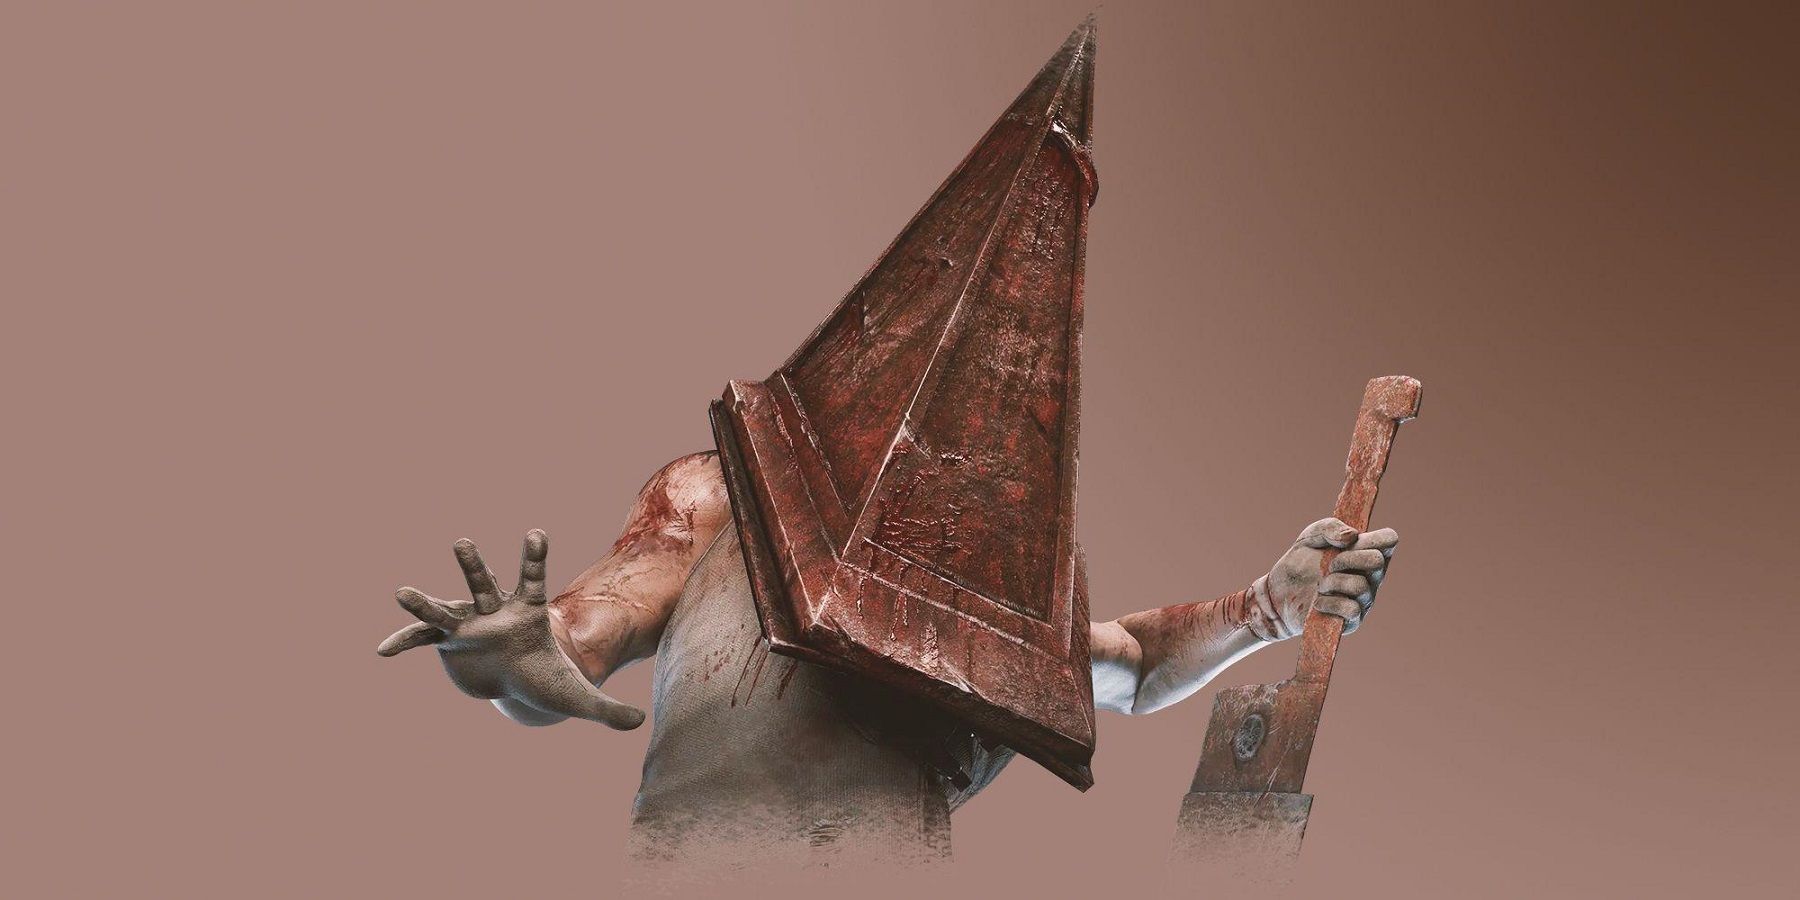 An image of Silent Hill's Pyramid Head, as depicted in Dead by Daylight.